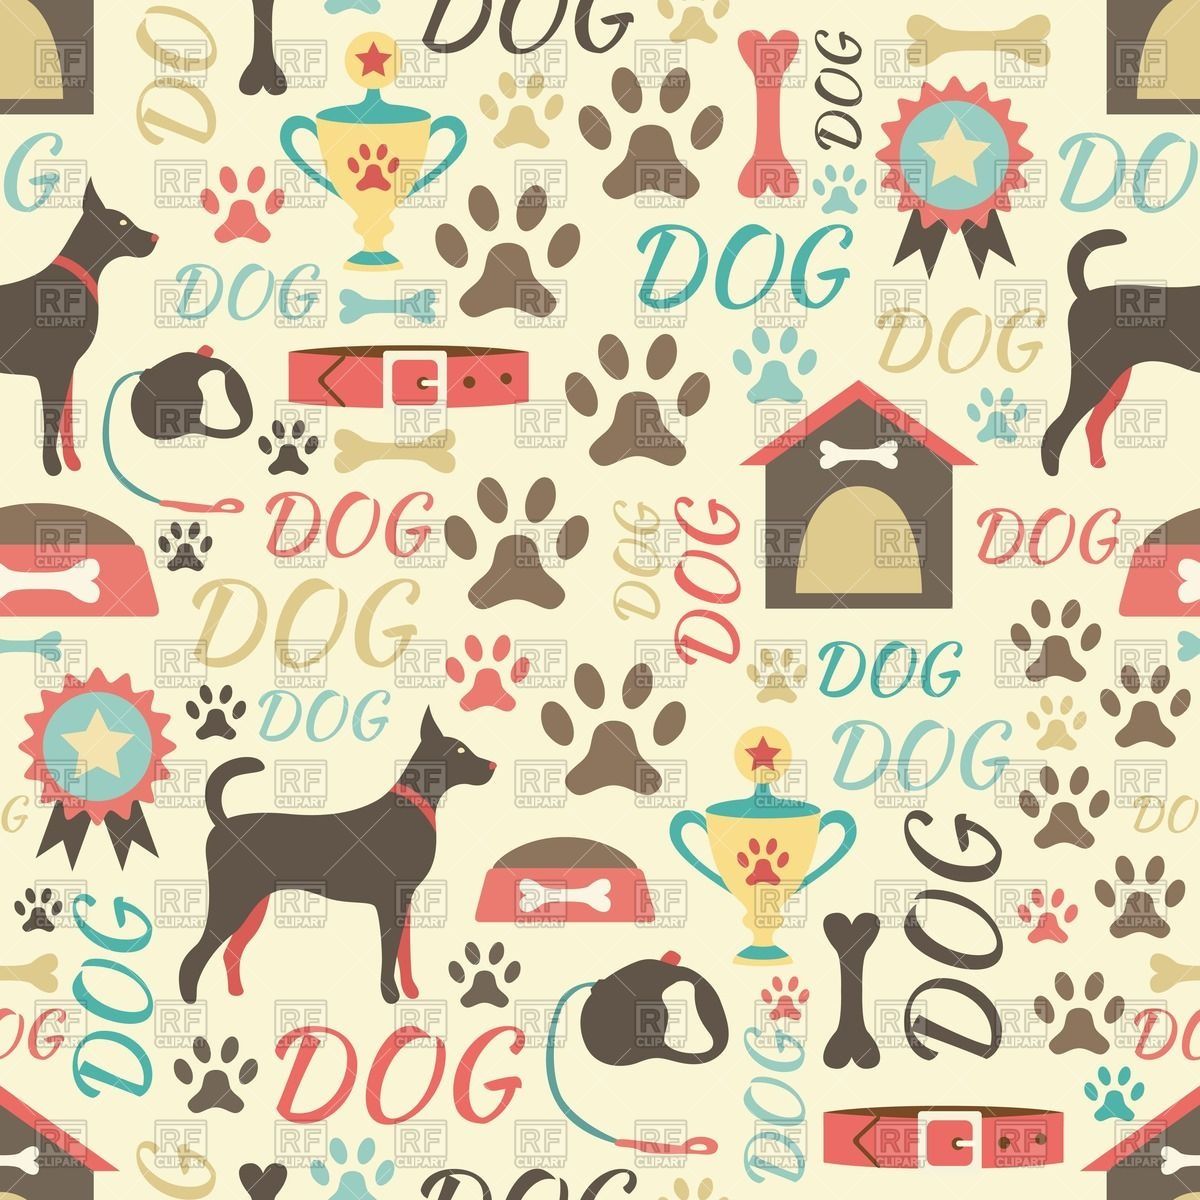 Seamless retro style background with dog doghouse dog collars